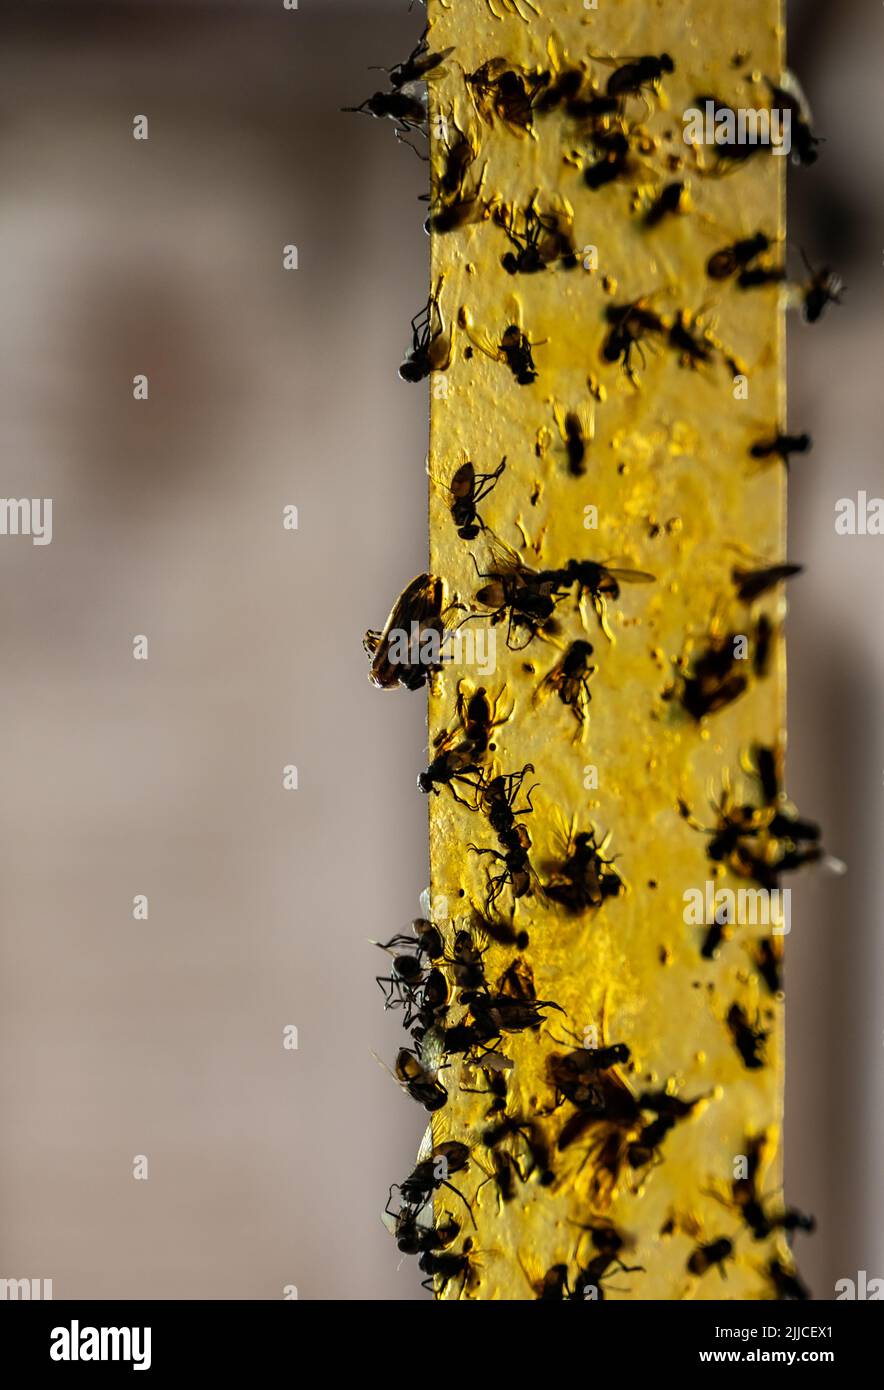 https://c8.alamy.com/comp/2JJCEX1/strip-of-yellow-sticky-fly-paper-covered-with-insects-2JJCEX1.jpg